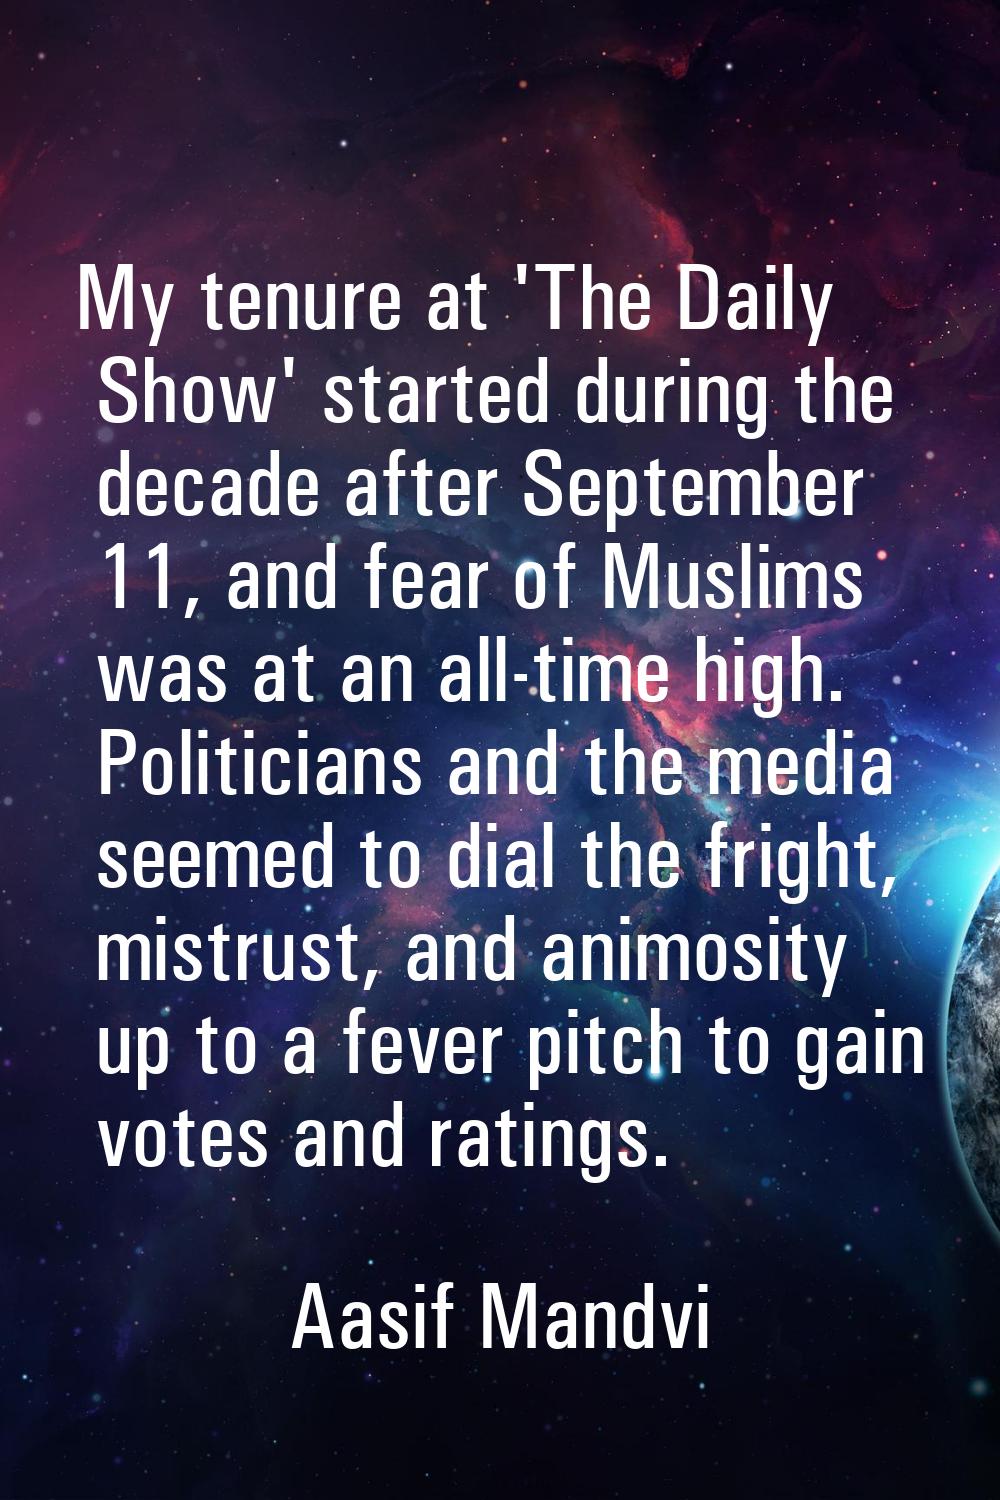 My tenure at 'The Daily Show' started during the decade after September 11, and fear of Muslims was